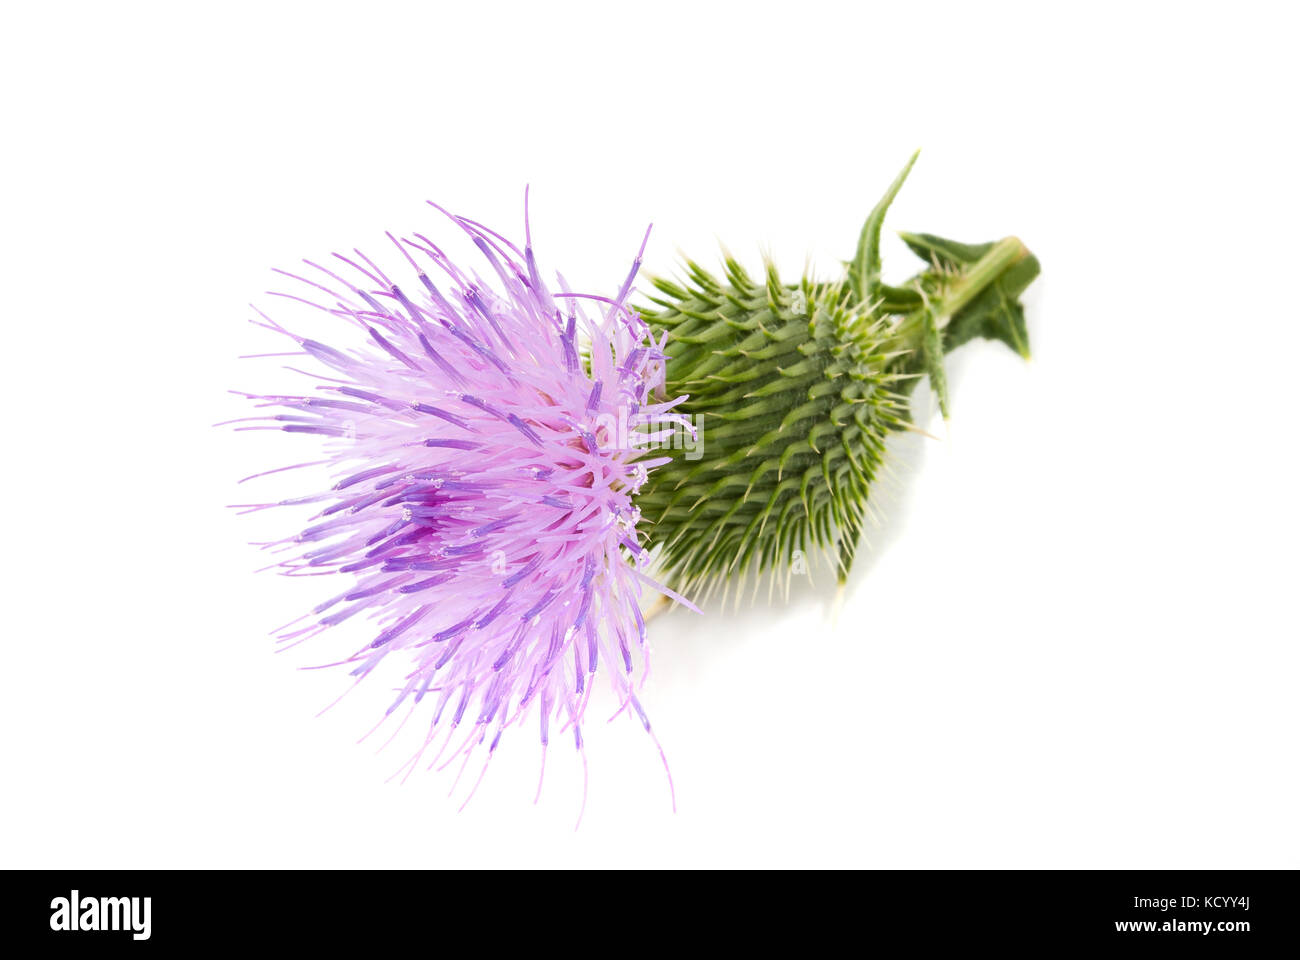 Milk thistle flower isolated on white background Banque D'Images